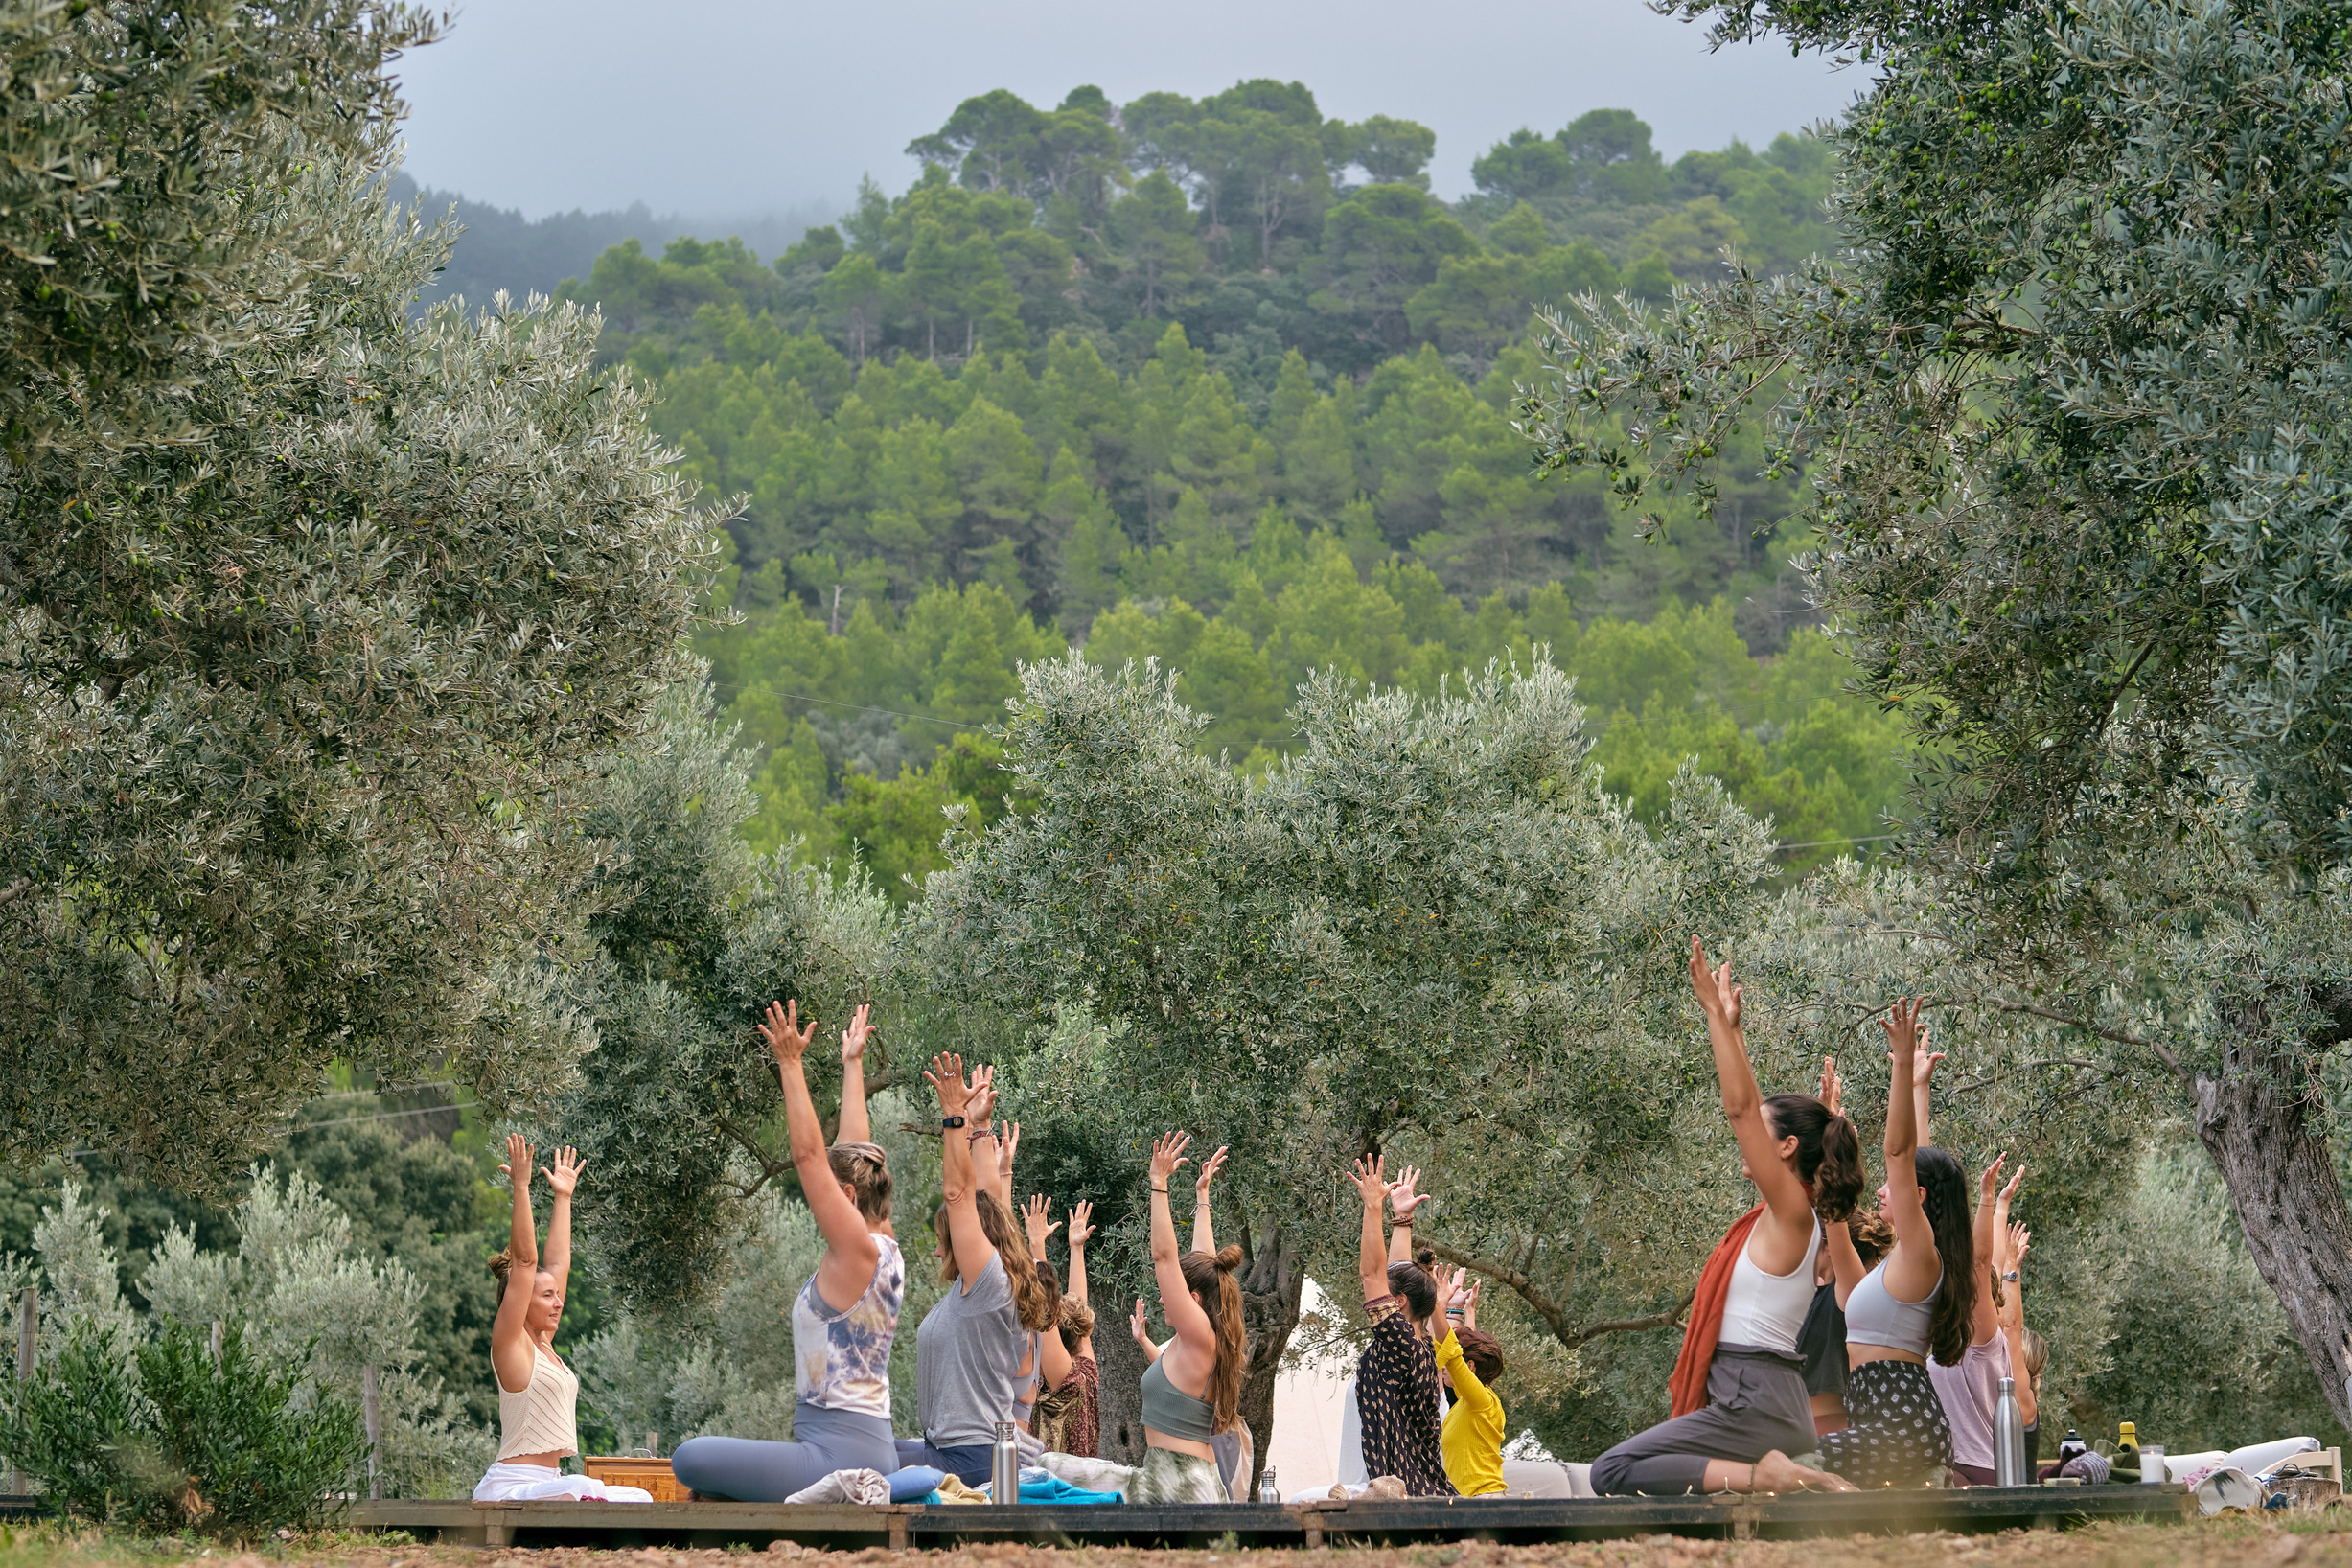 Females raising arms during meditation in nature